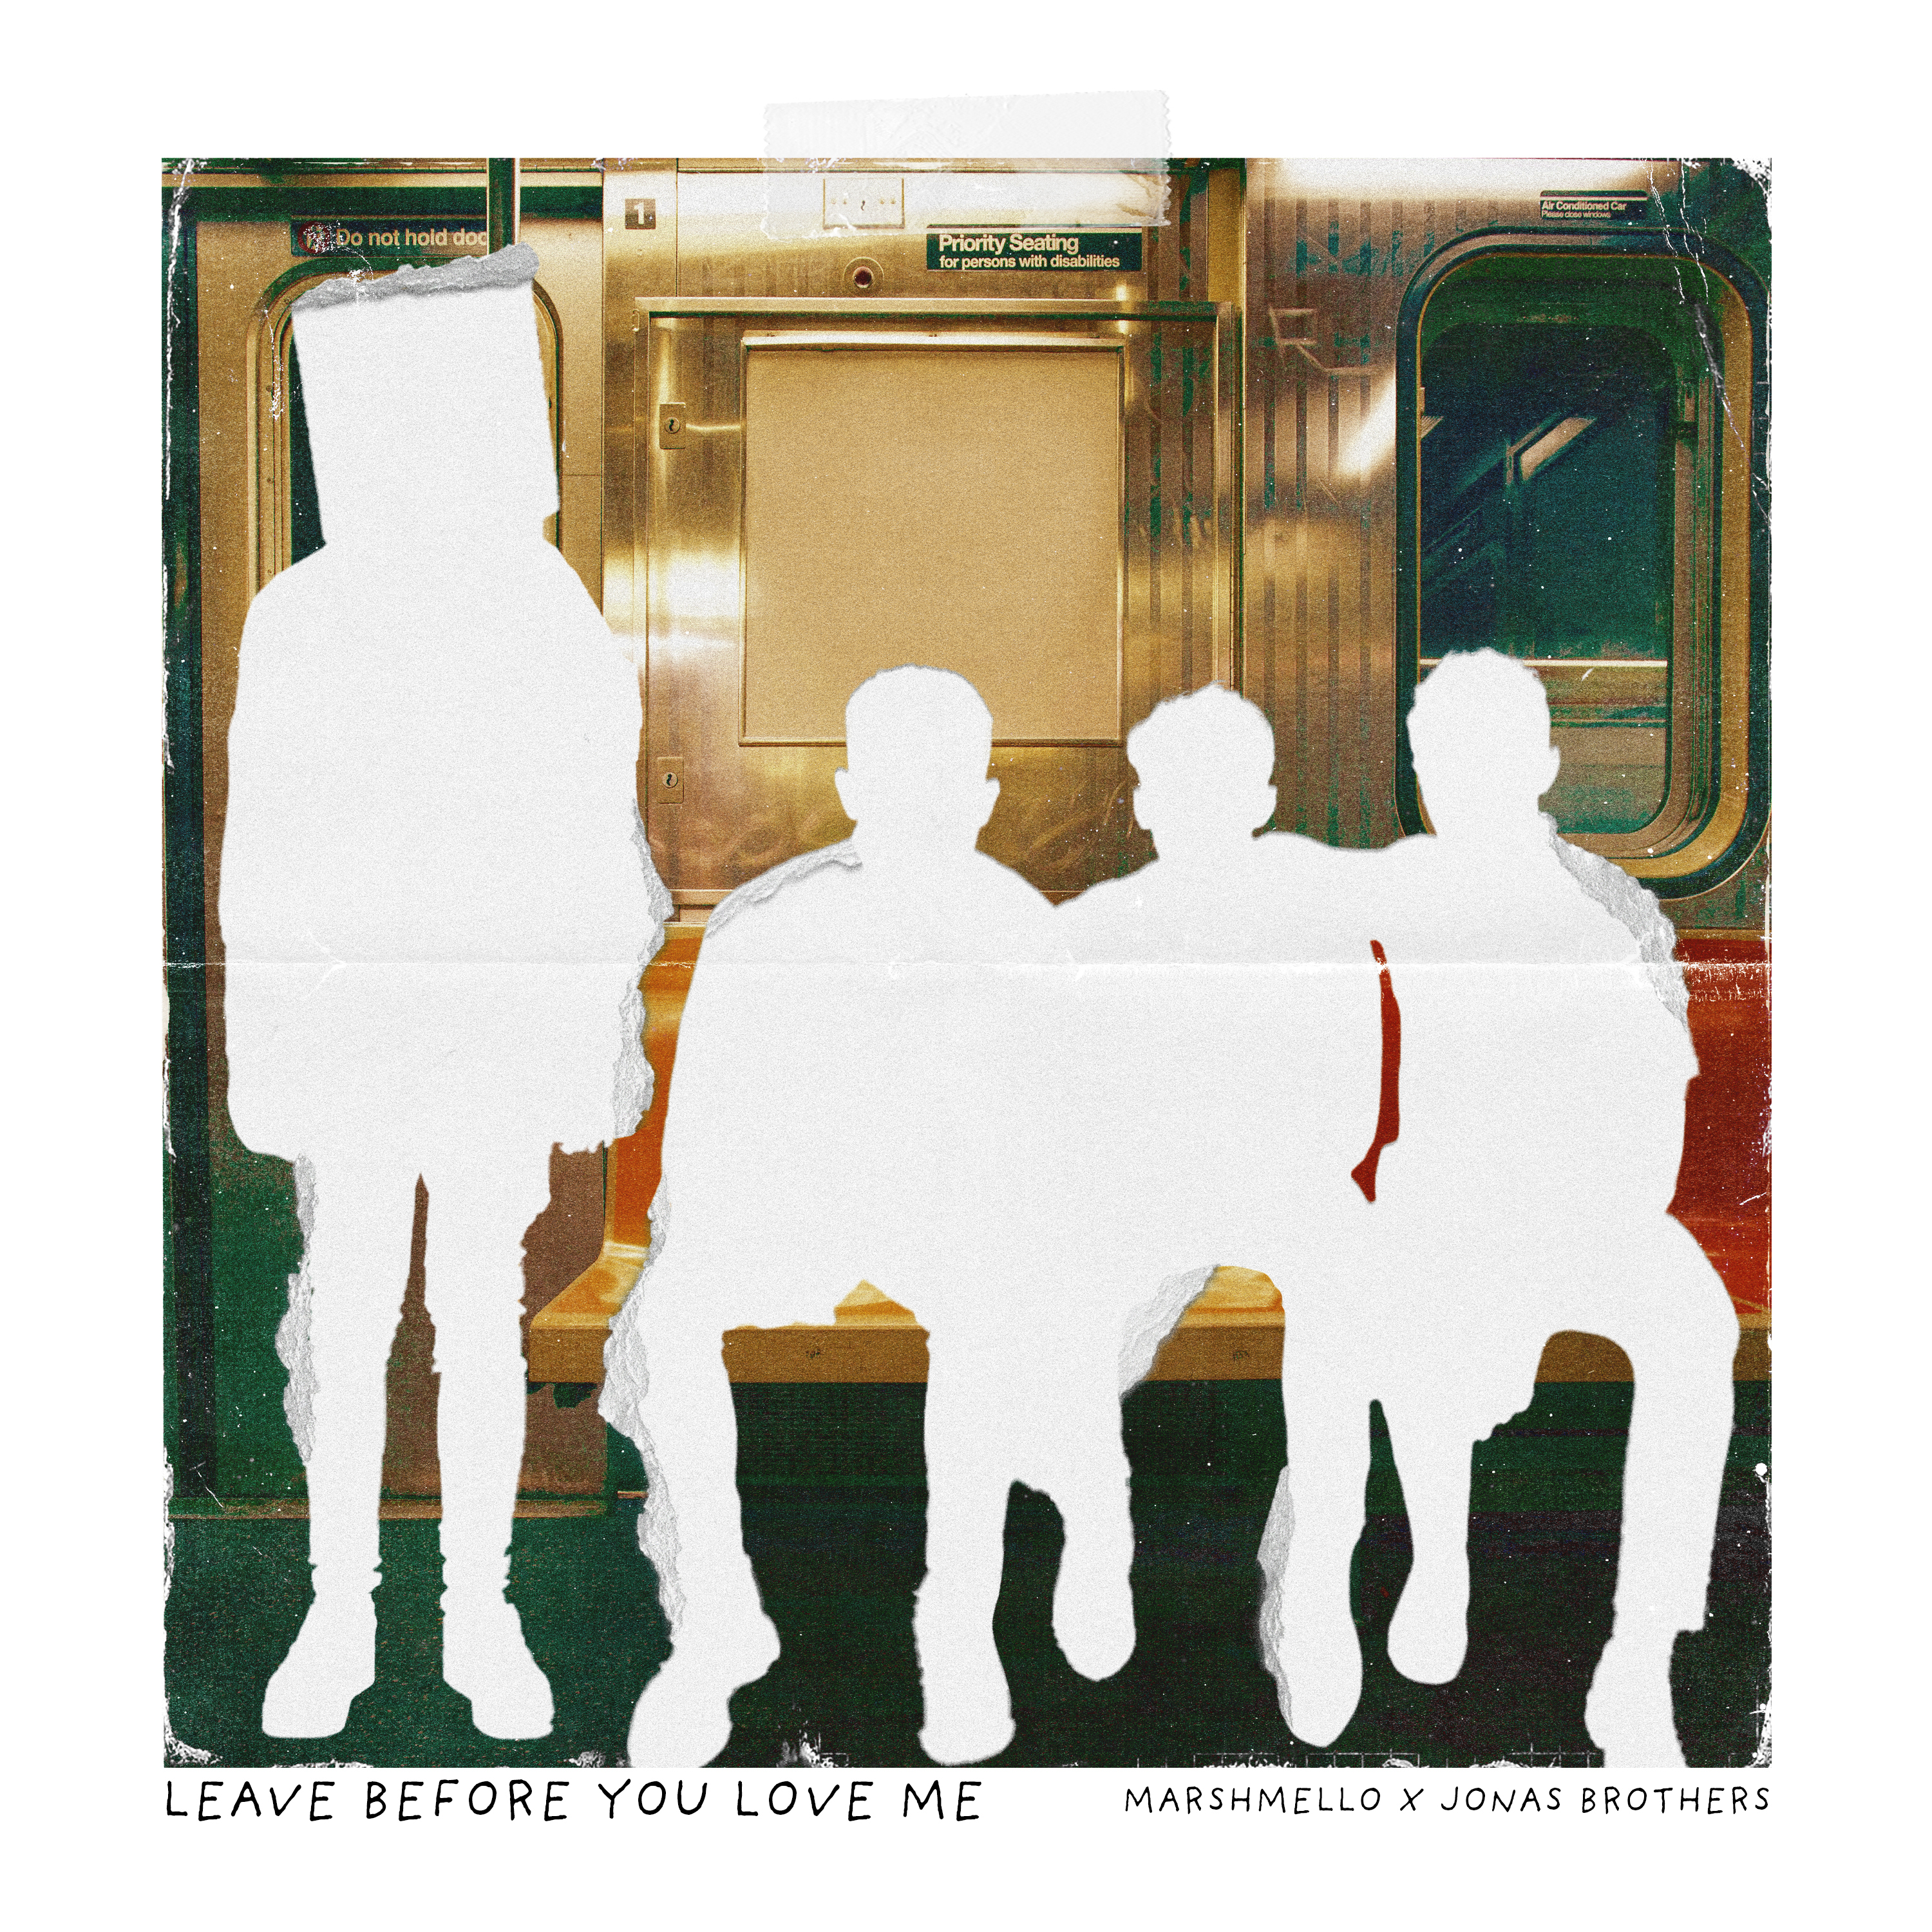 MARSHMELLO AND JONAS BROTHERS RELEASE NEW SONG “LEAVE BEFORE YOU LOVE ME” (Press Release)